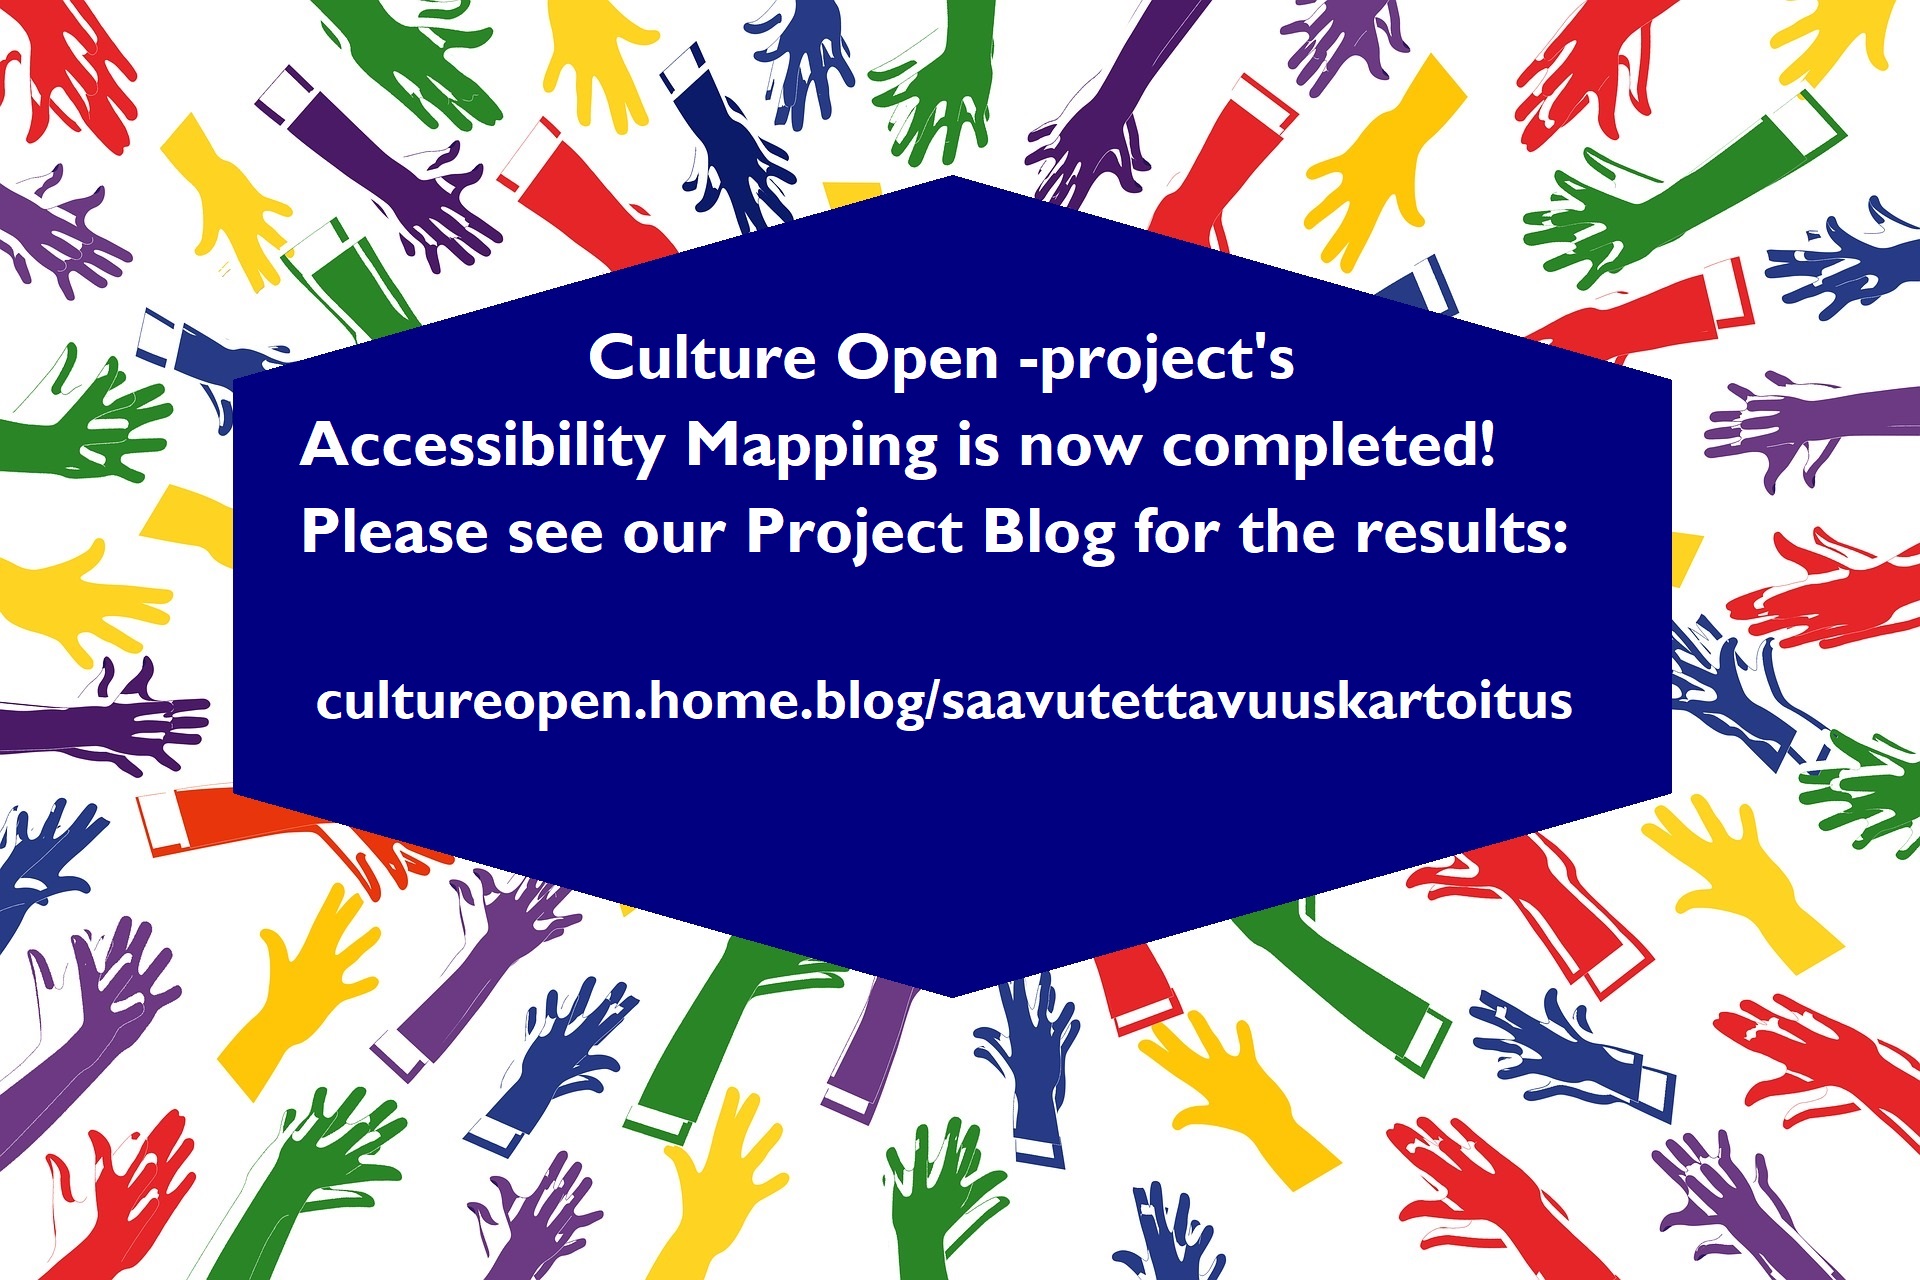 an ad saying that the accessibility mapping of Culture Open is now complete and the results may be found on the project blog